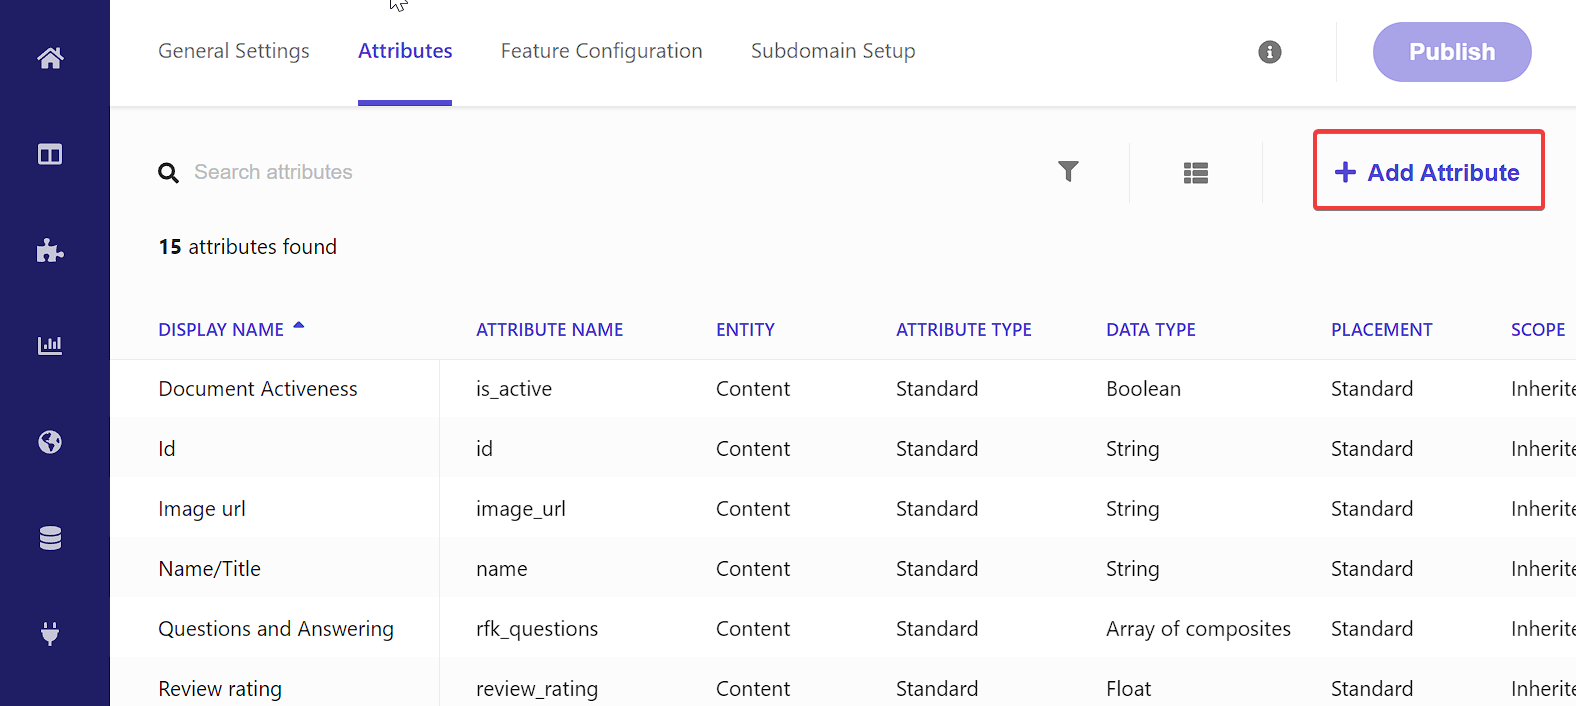 Screenshot of a content management system's attributes panel